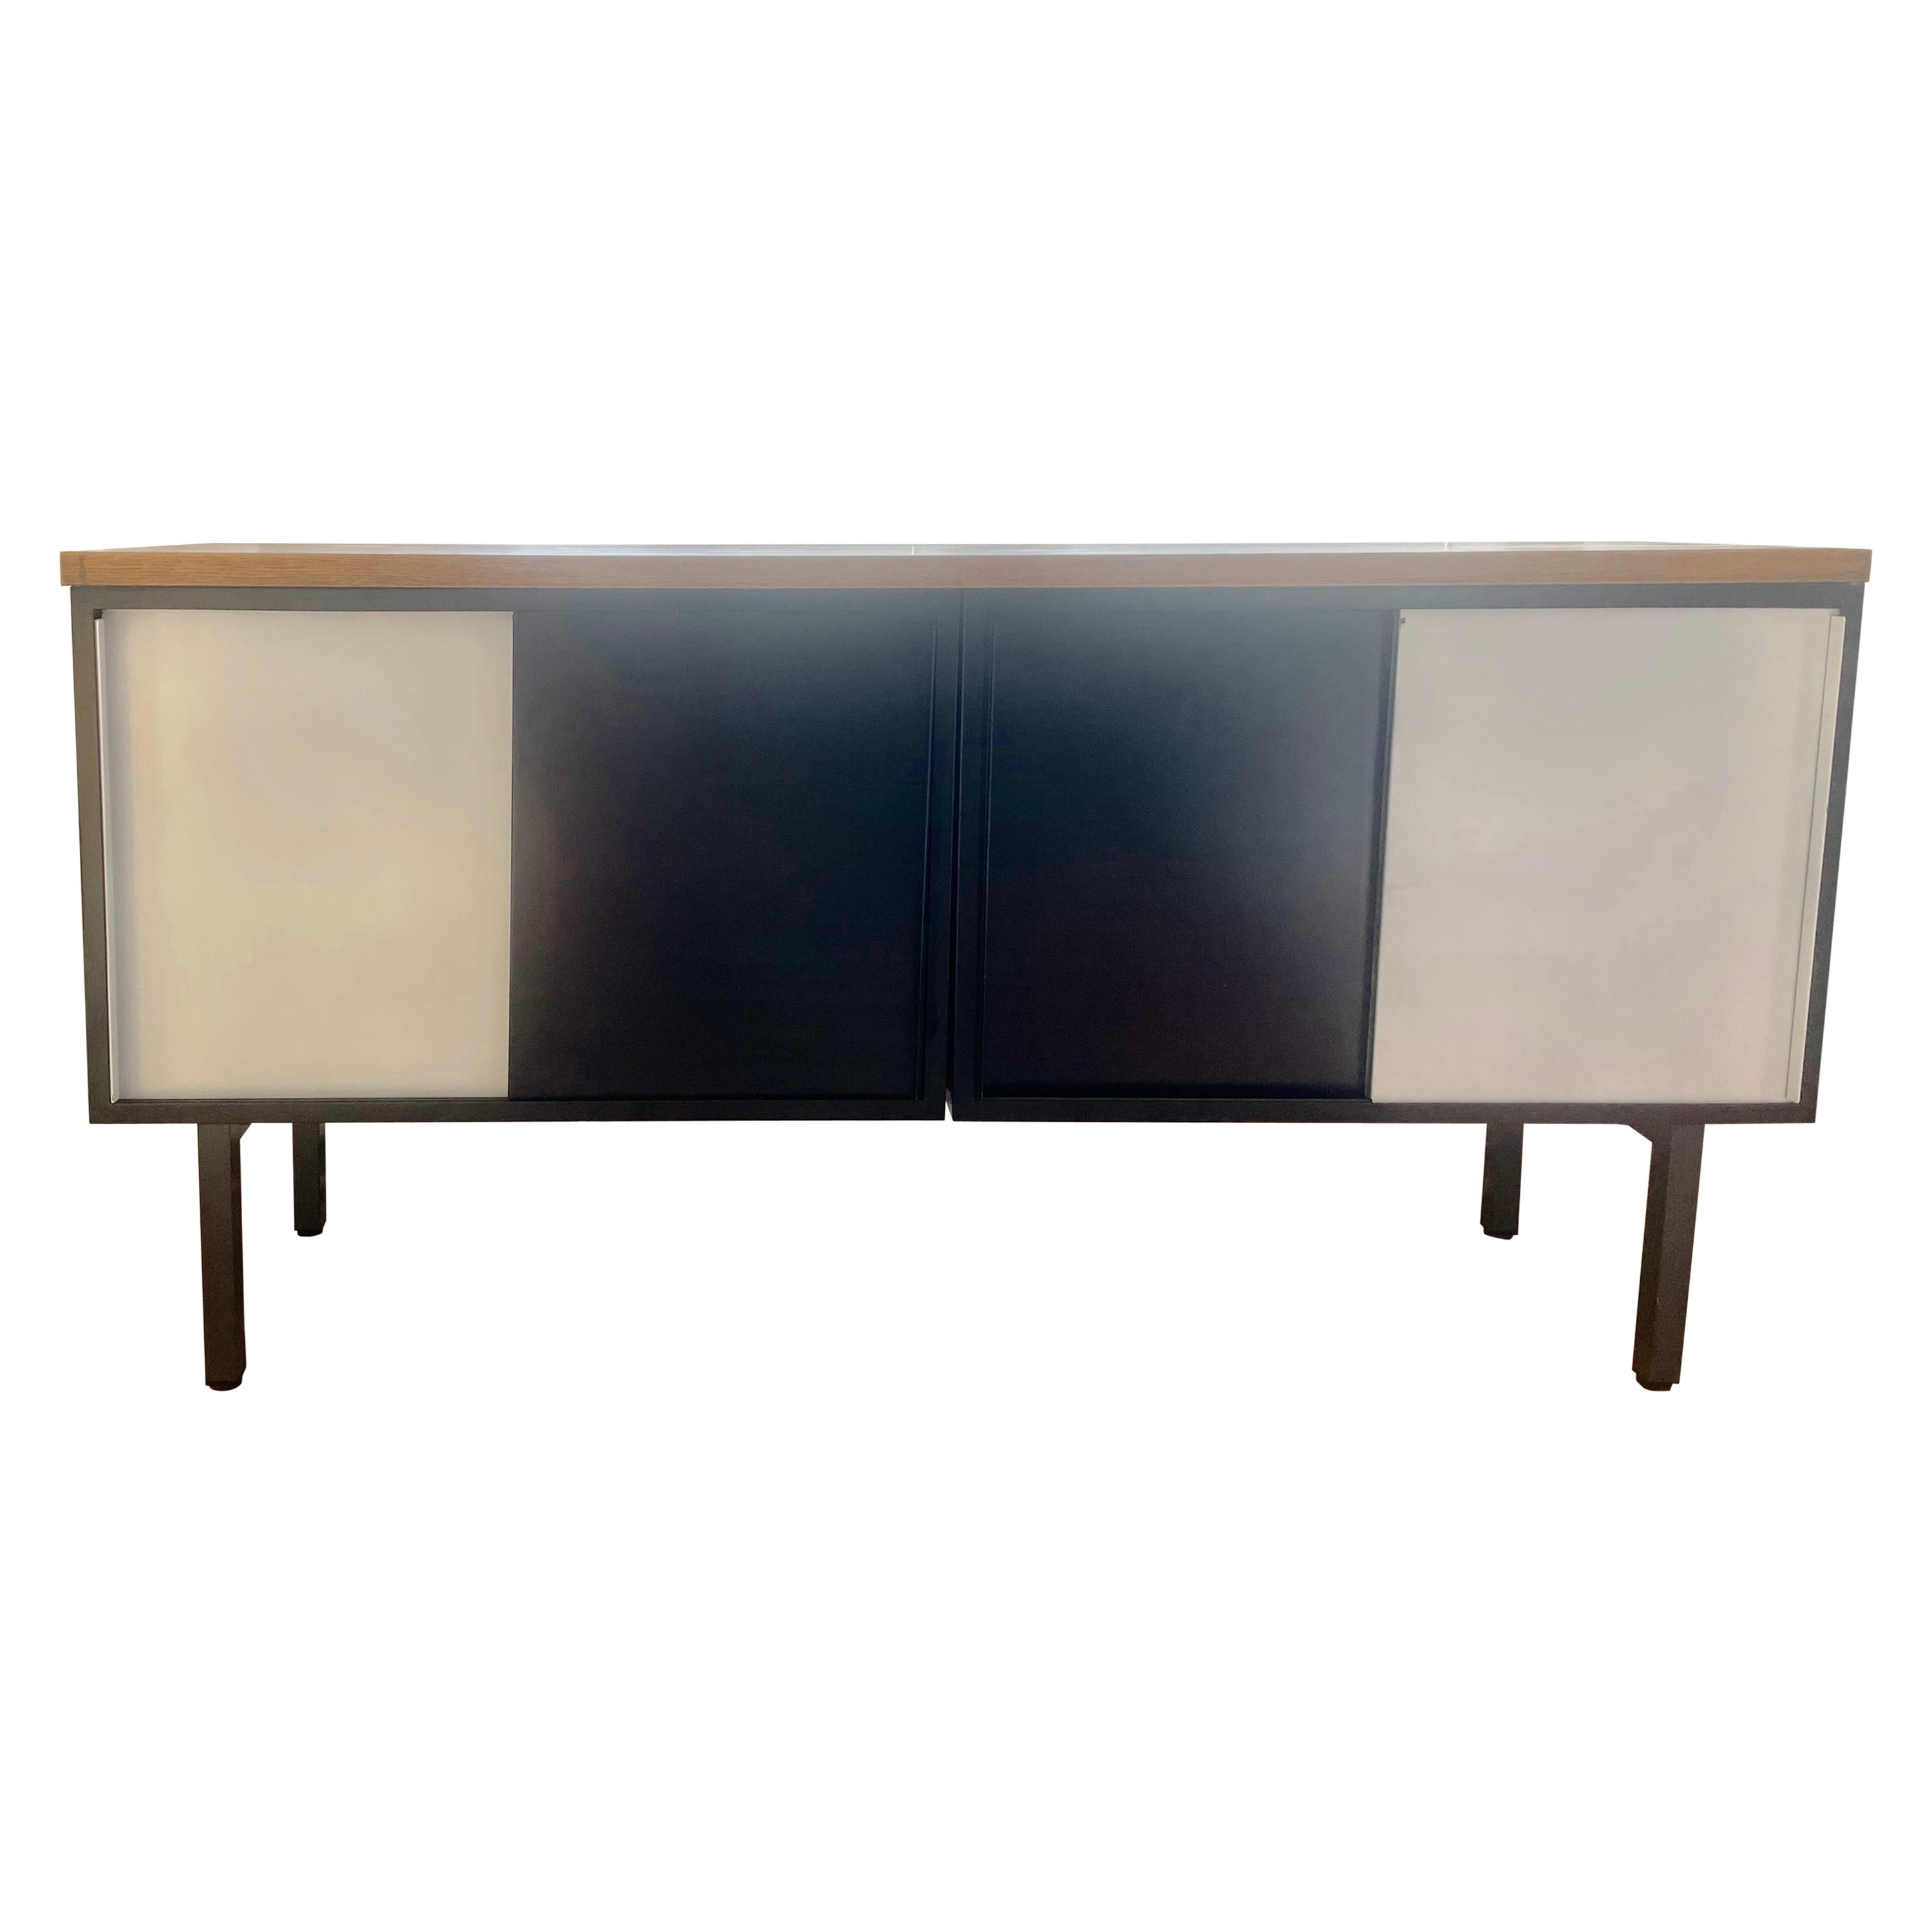 Black and White Metal and Wood Top Four Doors Sideboard by Pastoe, Netherlands. For Sale